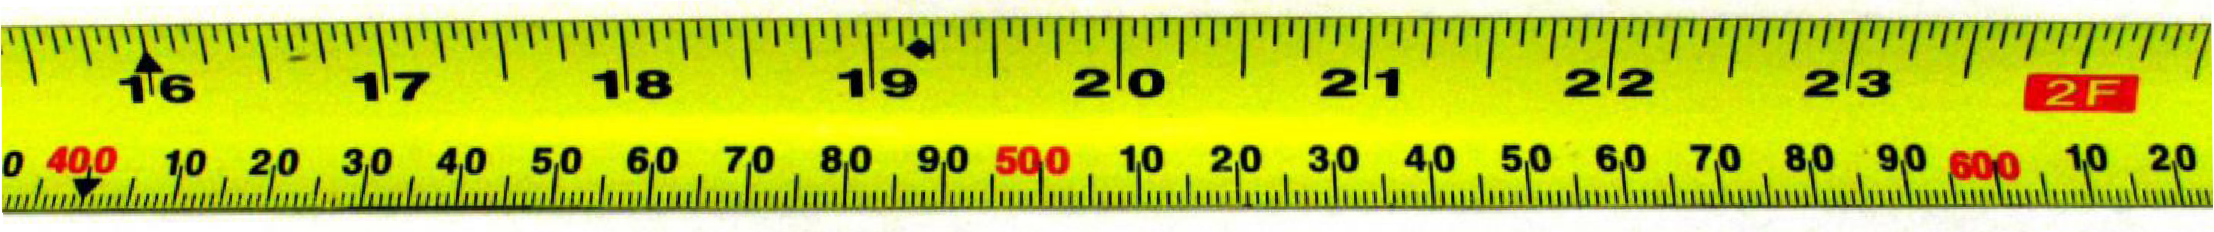 Measuring Tape - Inches & Centimeters